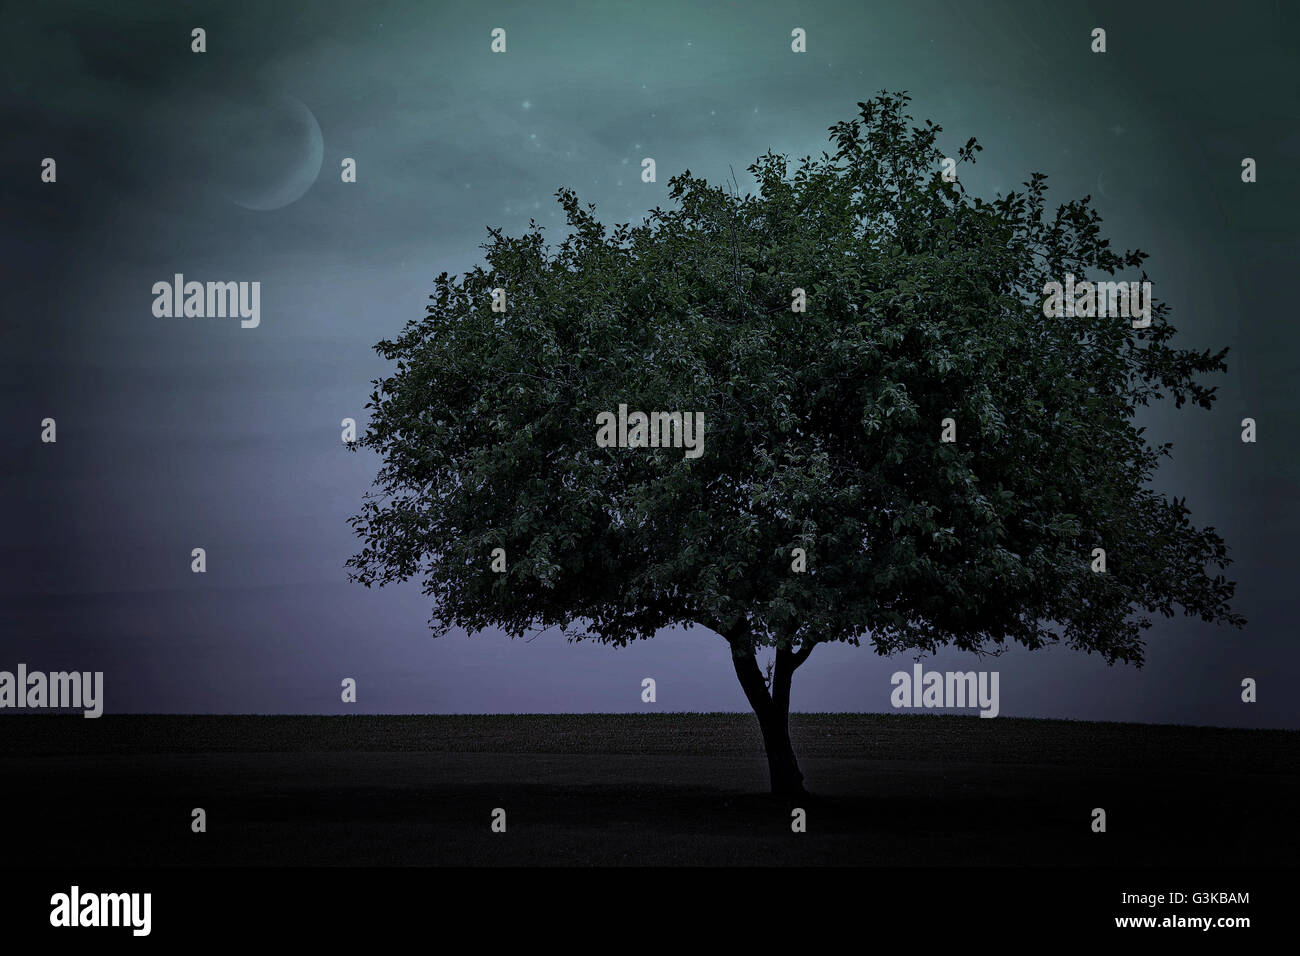 Single tree in Michigan field with moon and stars in twilight sky background. Stock Photo